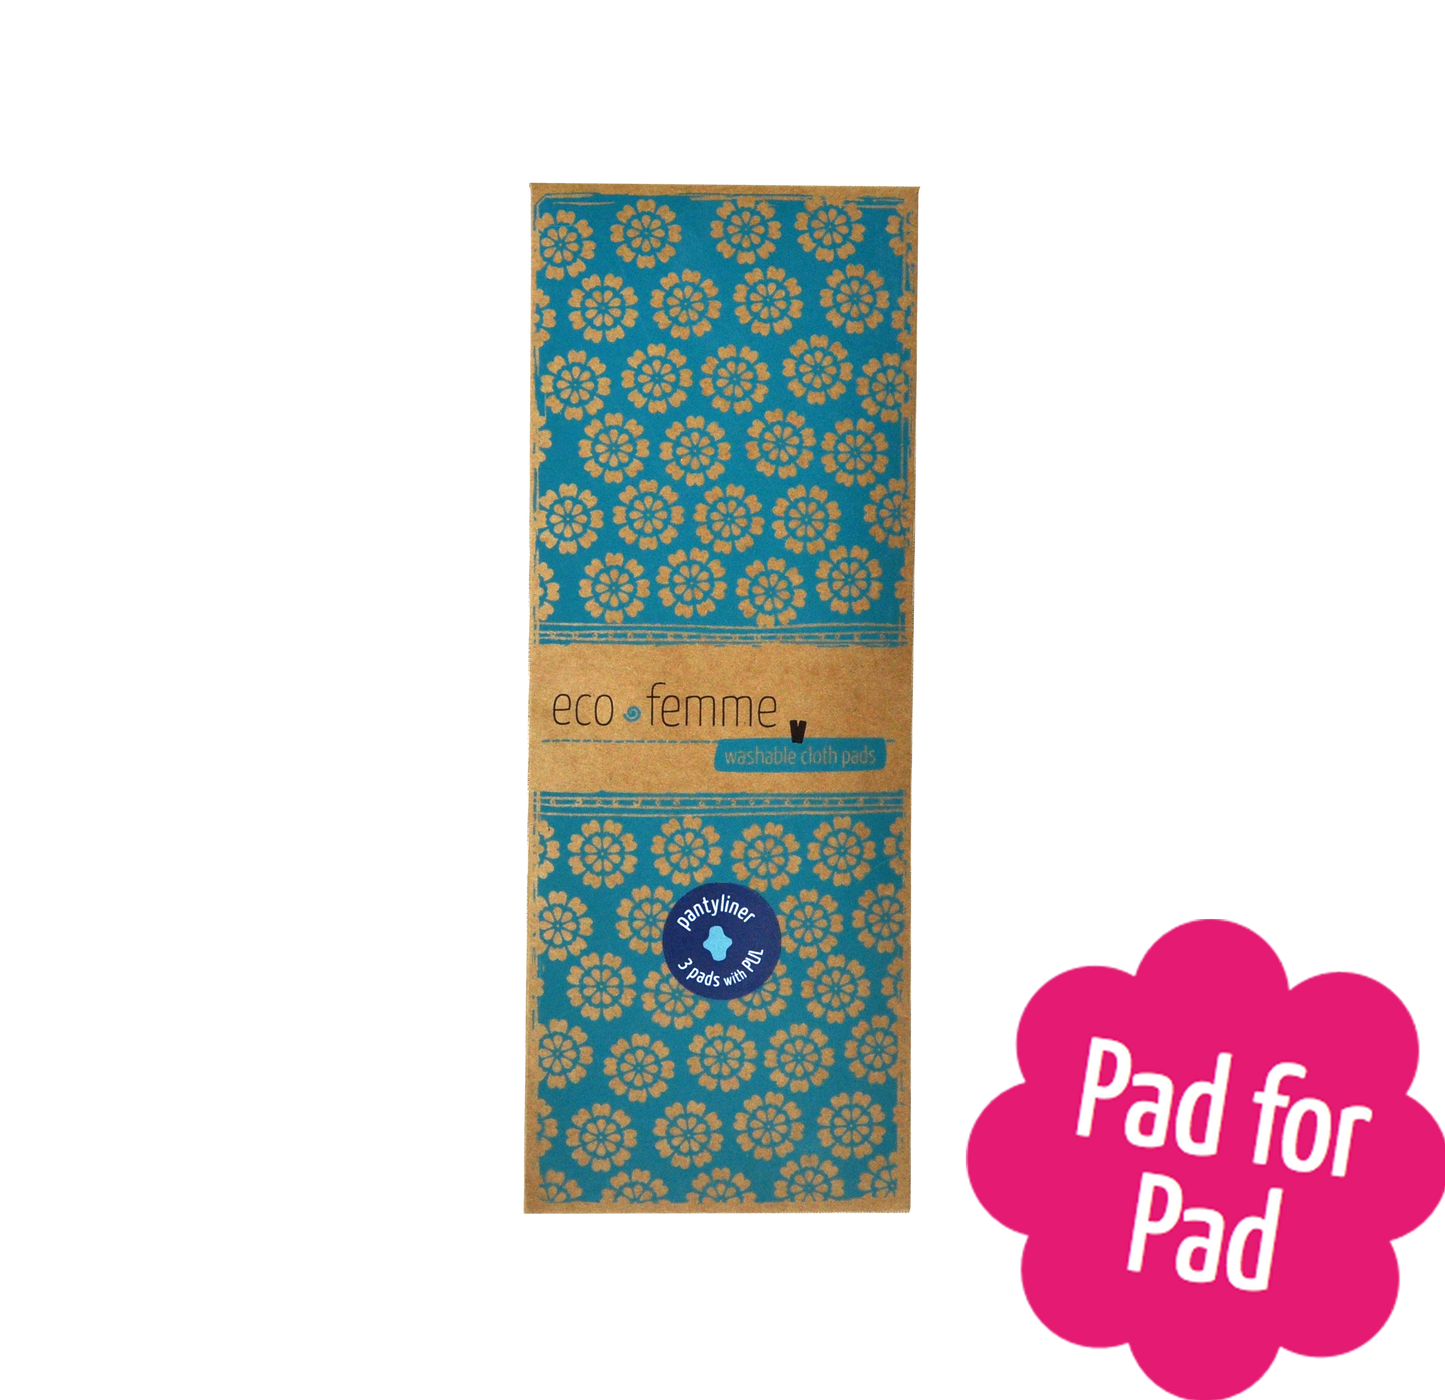 Reusable and eco-friendly pantyliners, providing comfortable and sustainable period care.